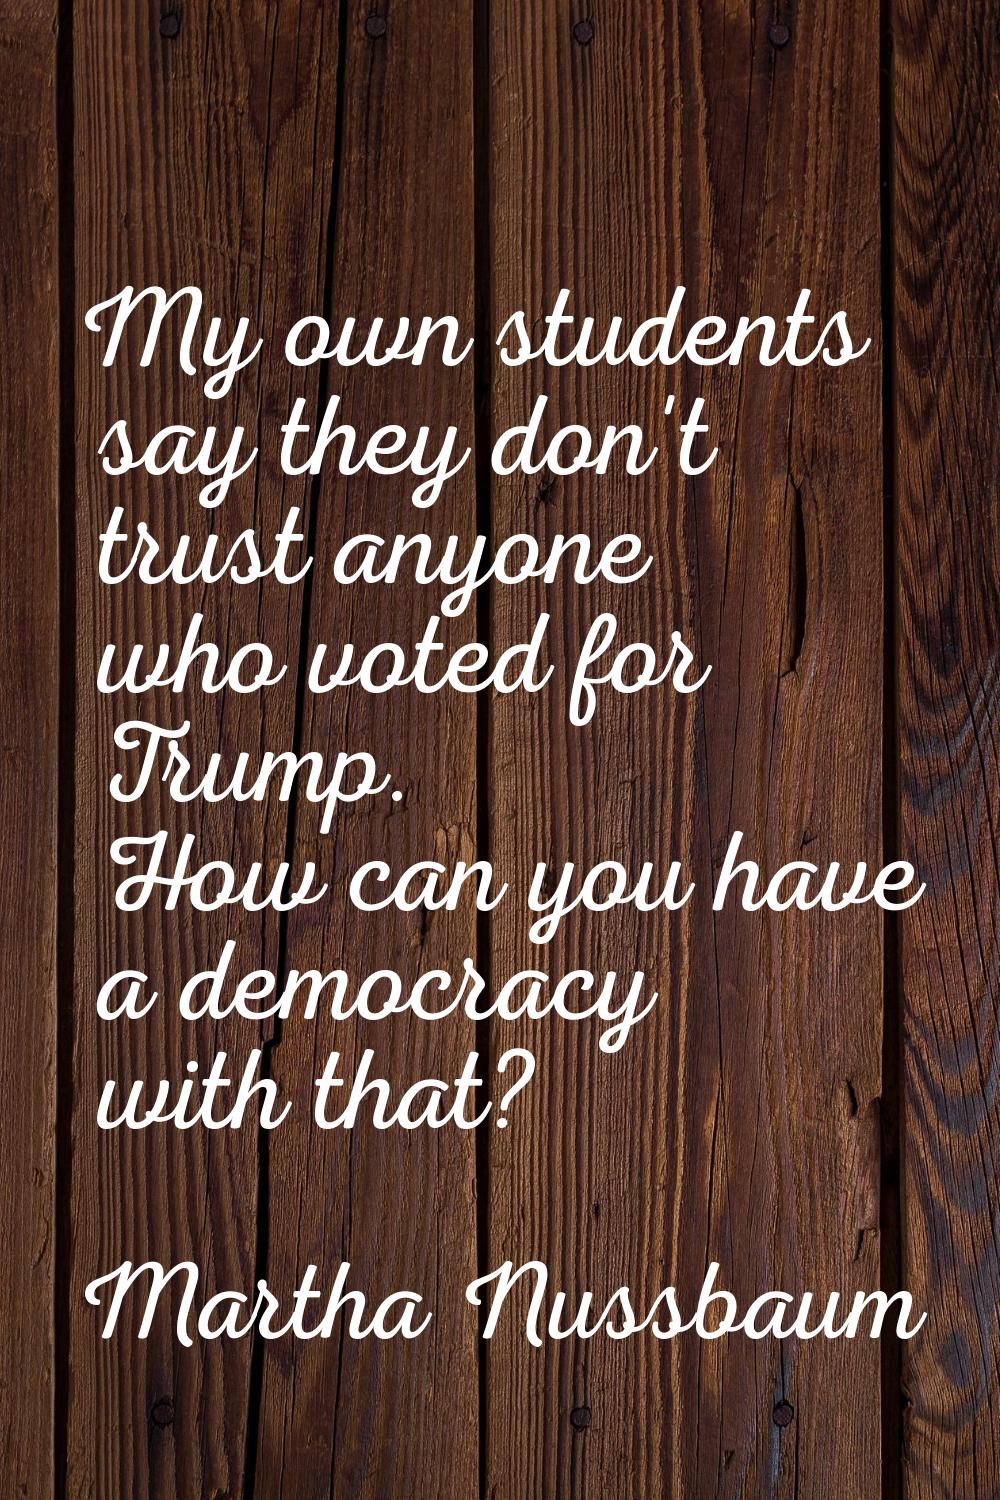 My own students say they don't trust anyone who voted for Trump. How can you have a democracy with 